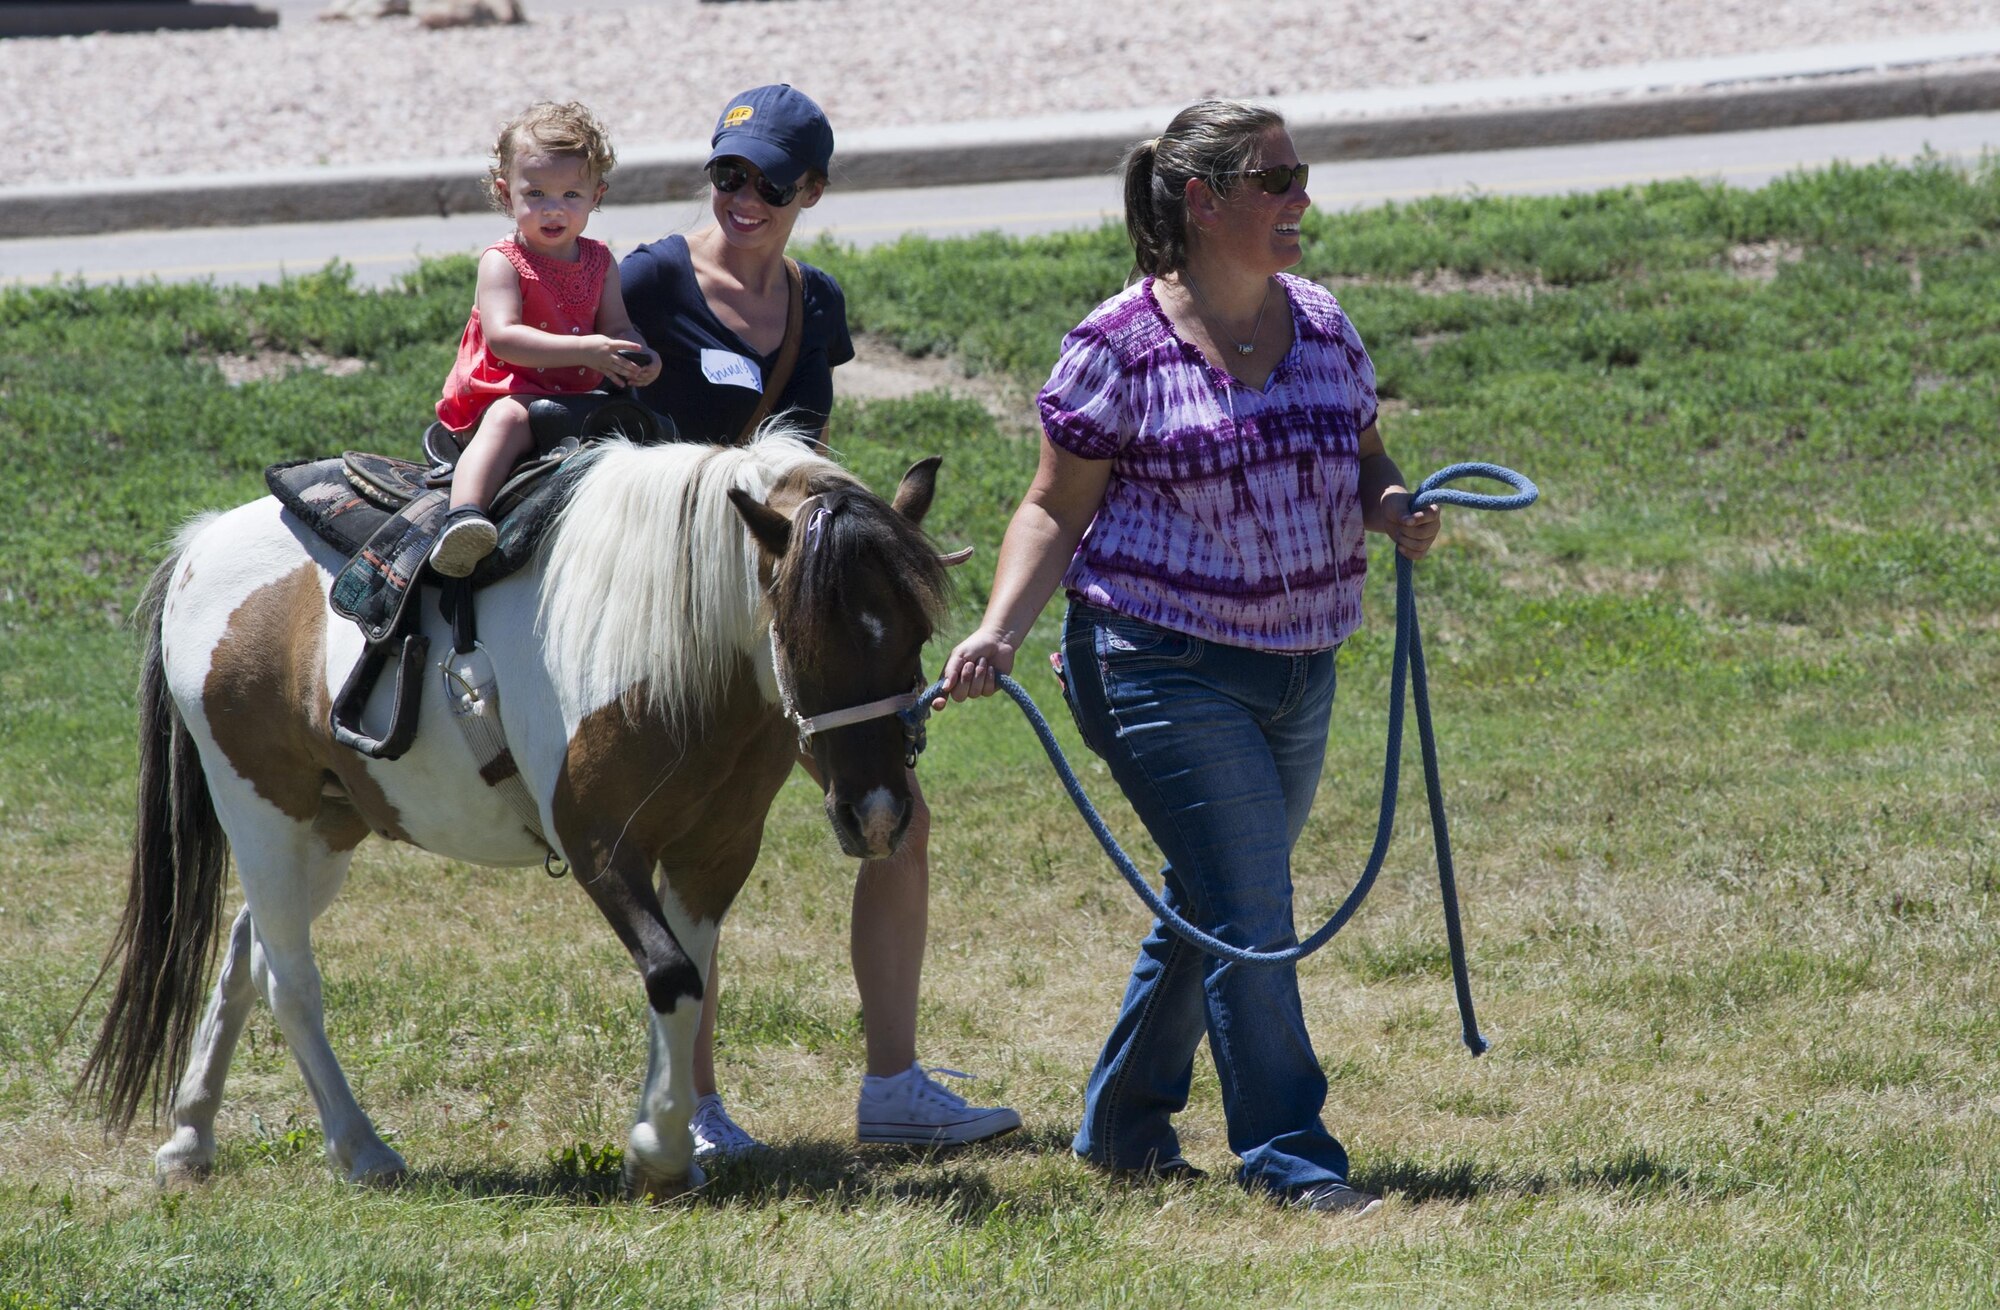 SCHRIEVER AIR FORCE BASE, Colo. -- Isabelle Scarlett Grissman, accompanied by her mom, Bonnie, rides a pony at Schriever's 2017 Summer Slam Picnic on Friday, July 21, 2017. Previous years offered elephant and camel rides to Airmen and their families, the ponies were a new addition to this years picnic. (U.S. Air Force photo/Senior Airman Laura Turner)